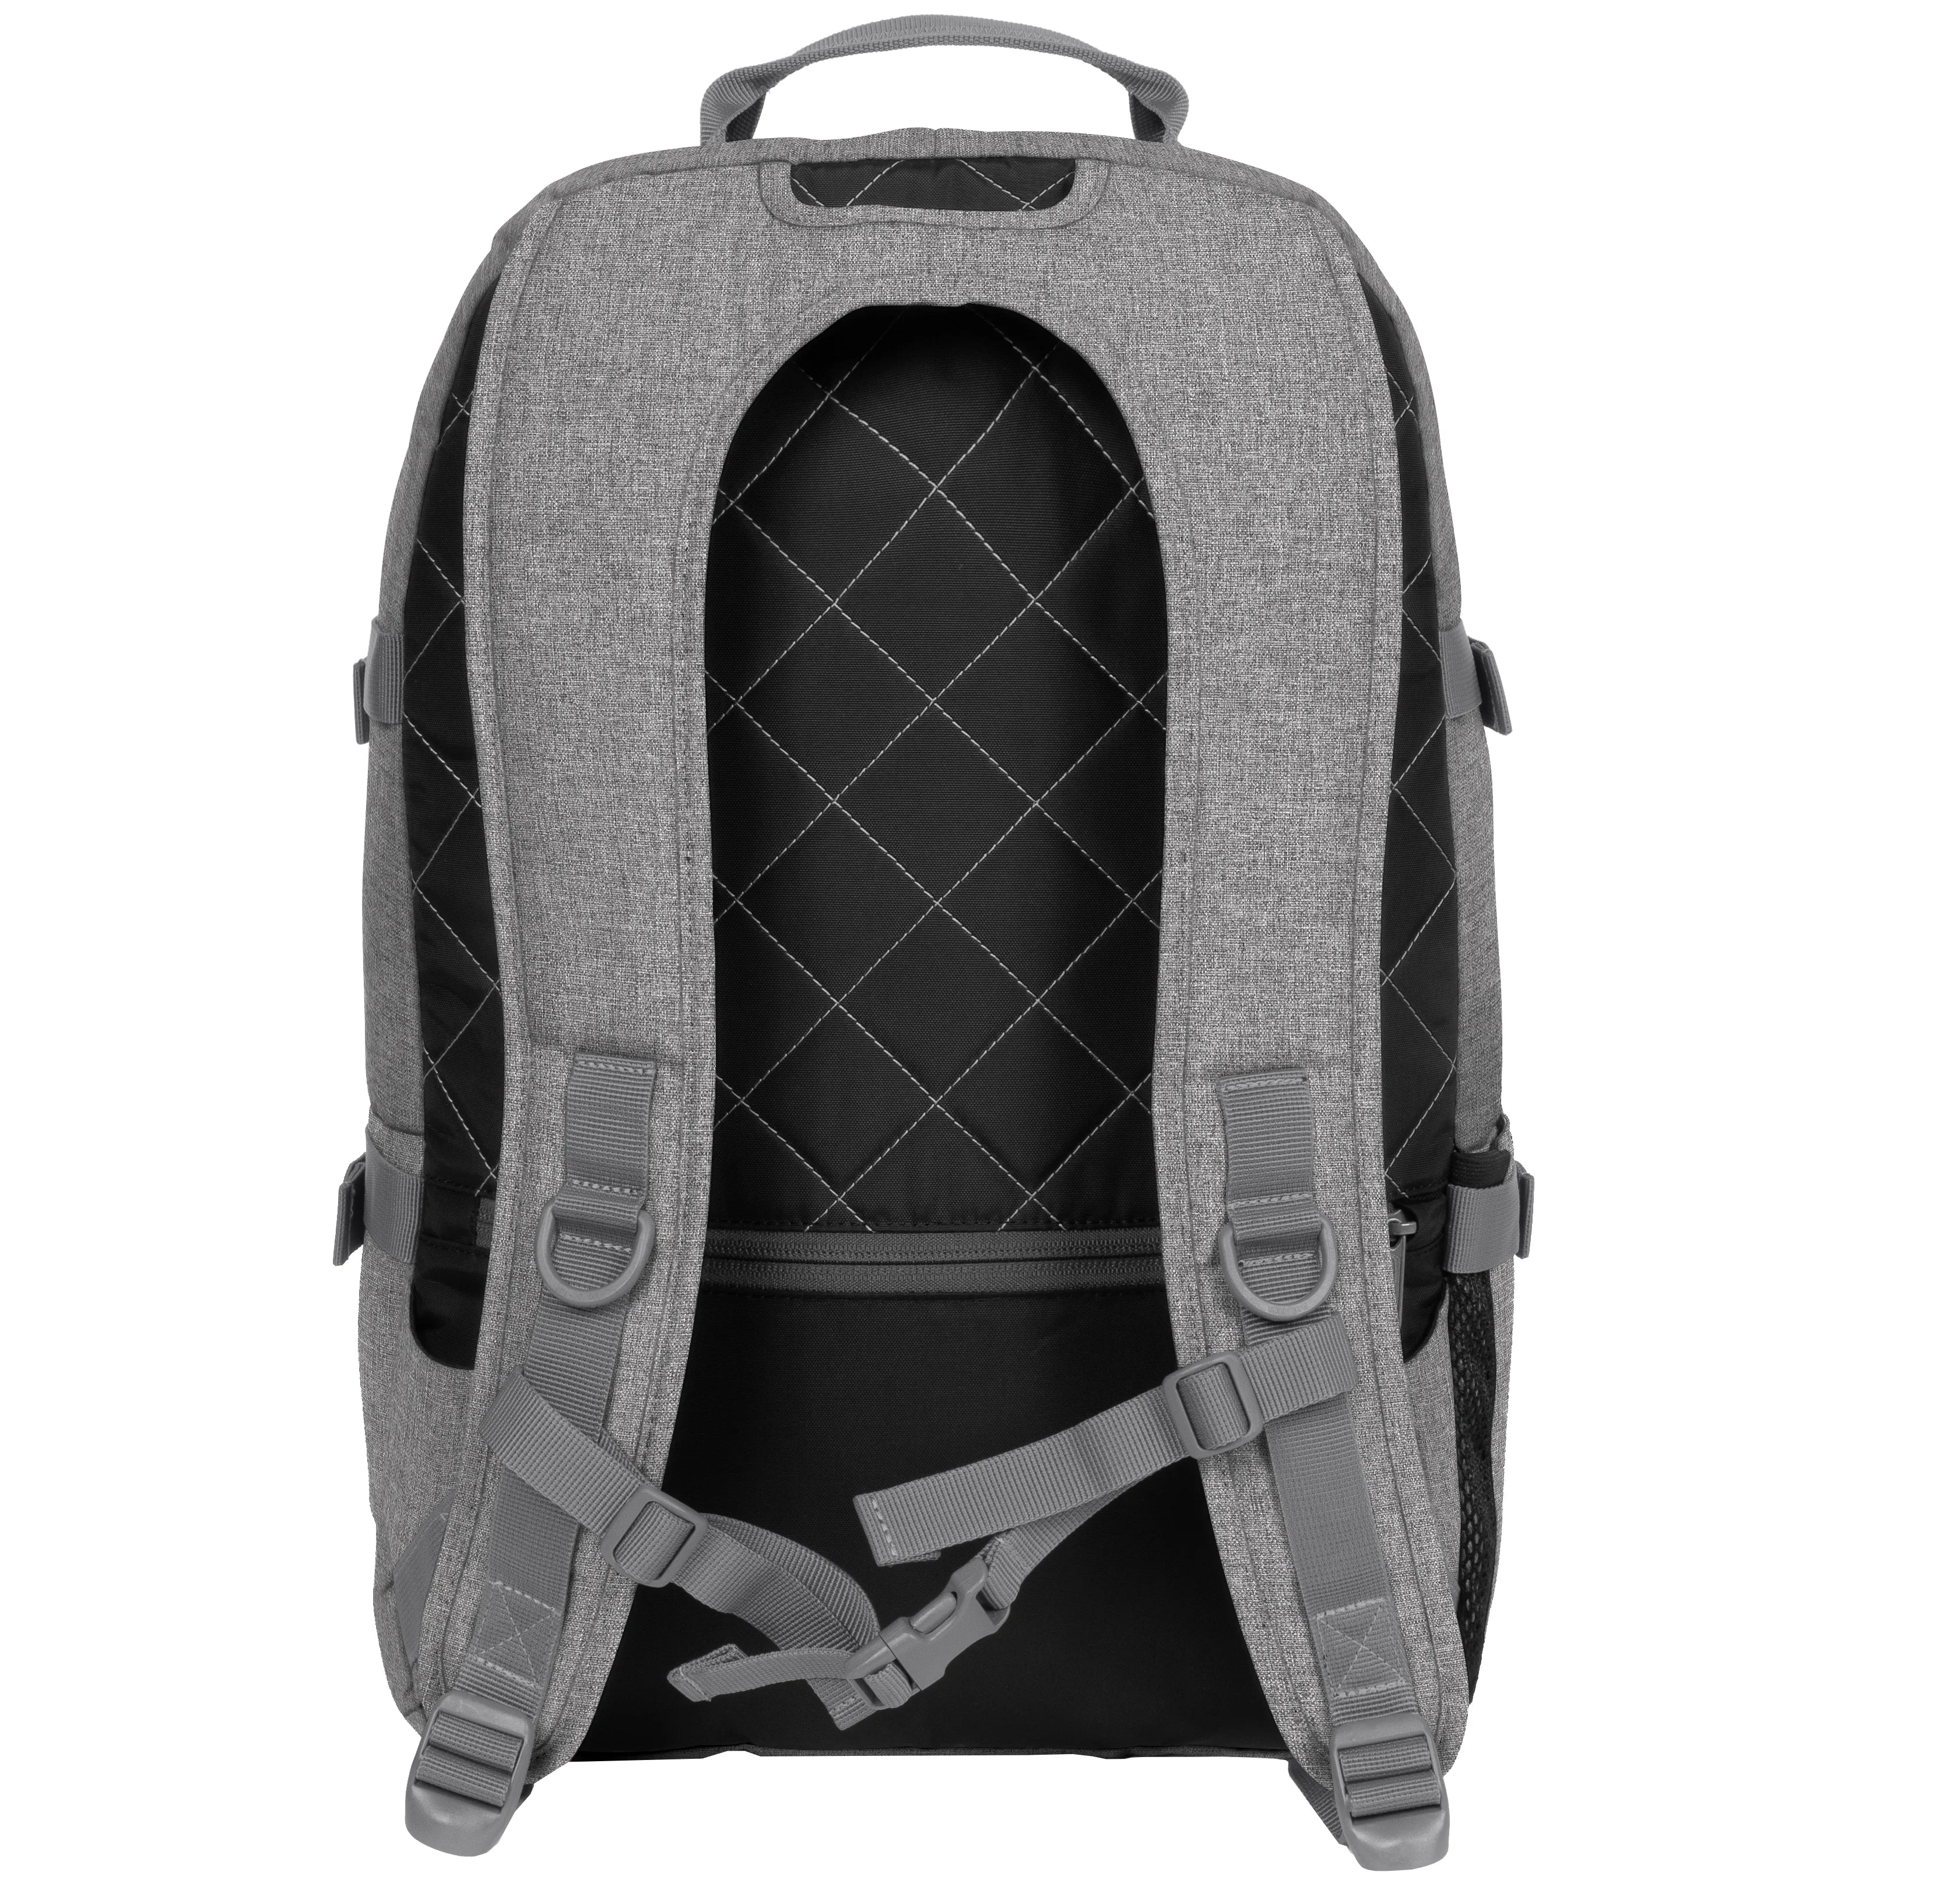 Eastpak Core Series Volker backpack with notebook compartment 49 cm - CS Mono Black2